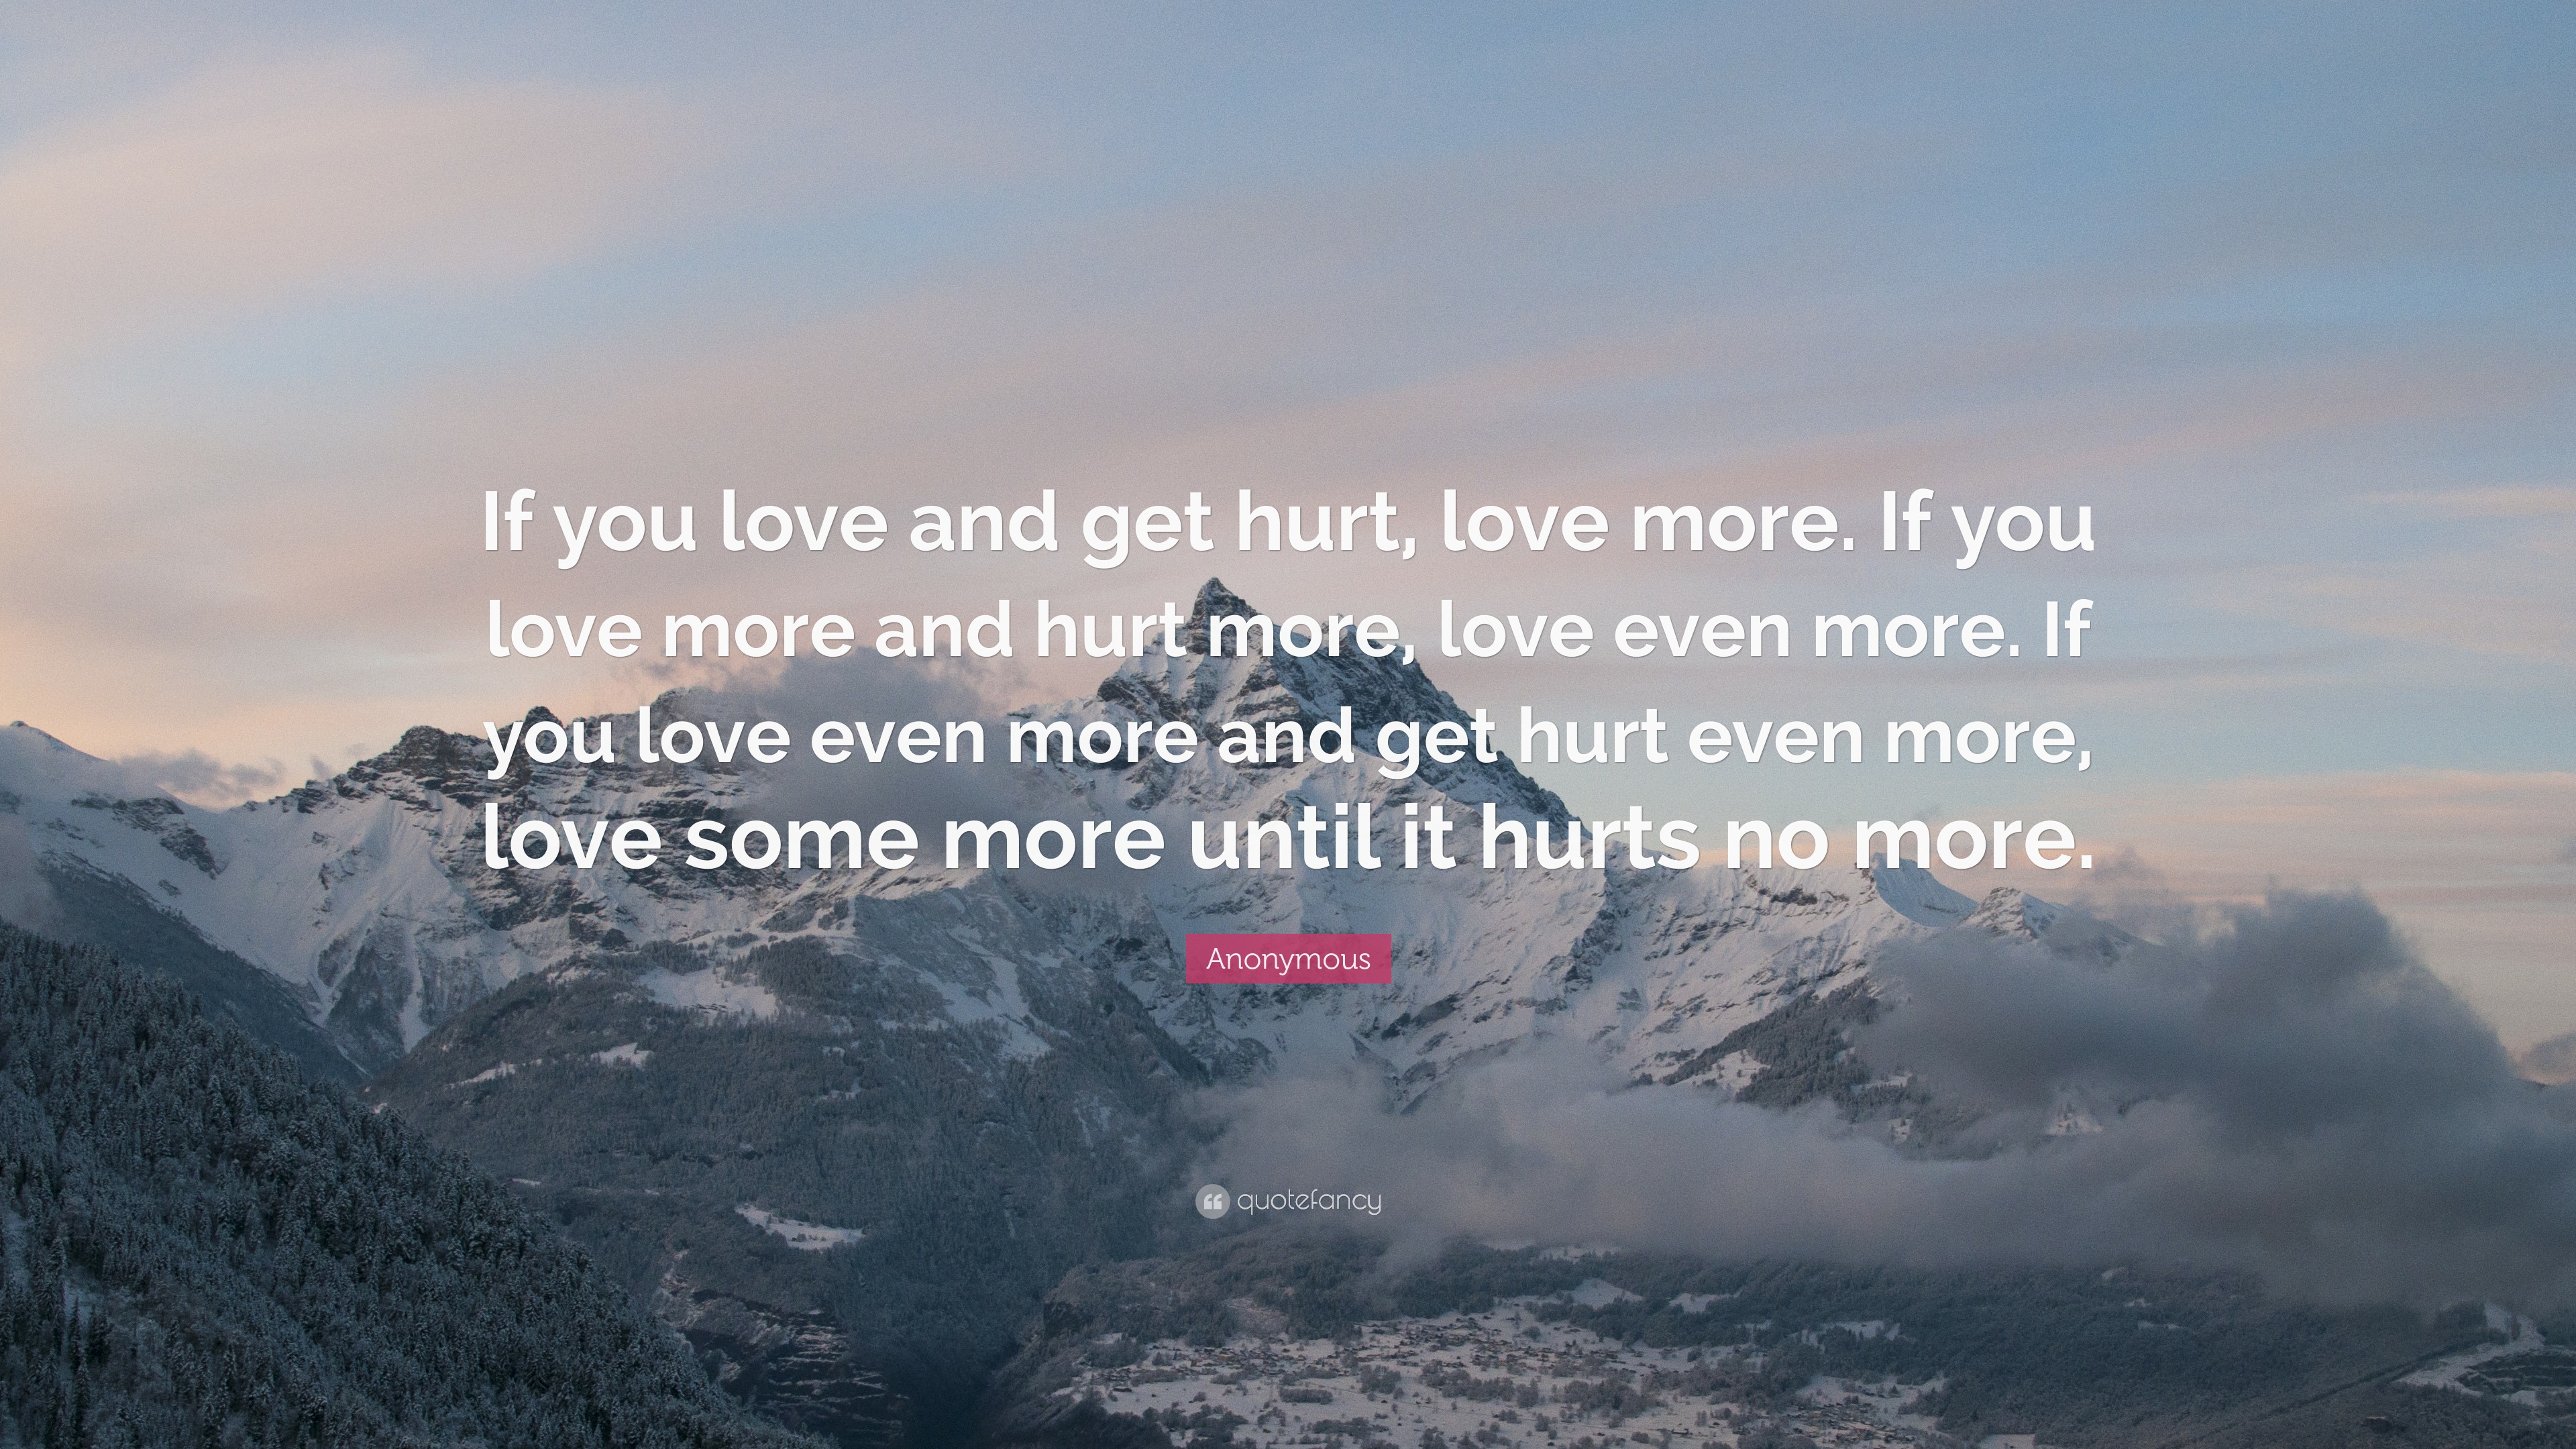 William Shakespeare Quote “If you love and hurt love more If